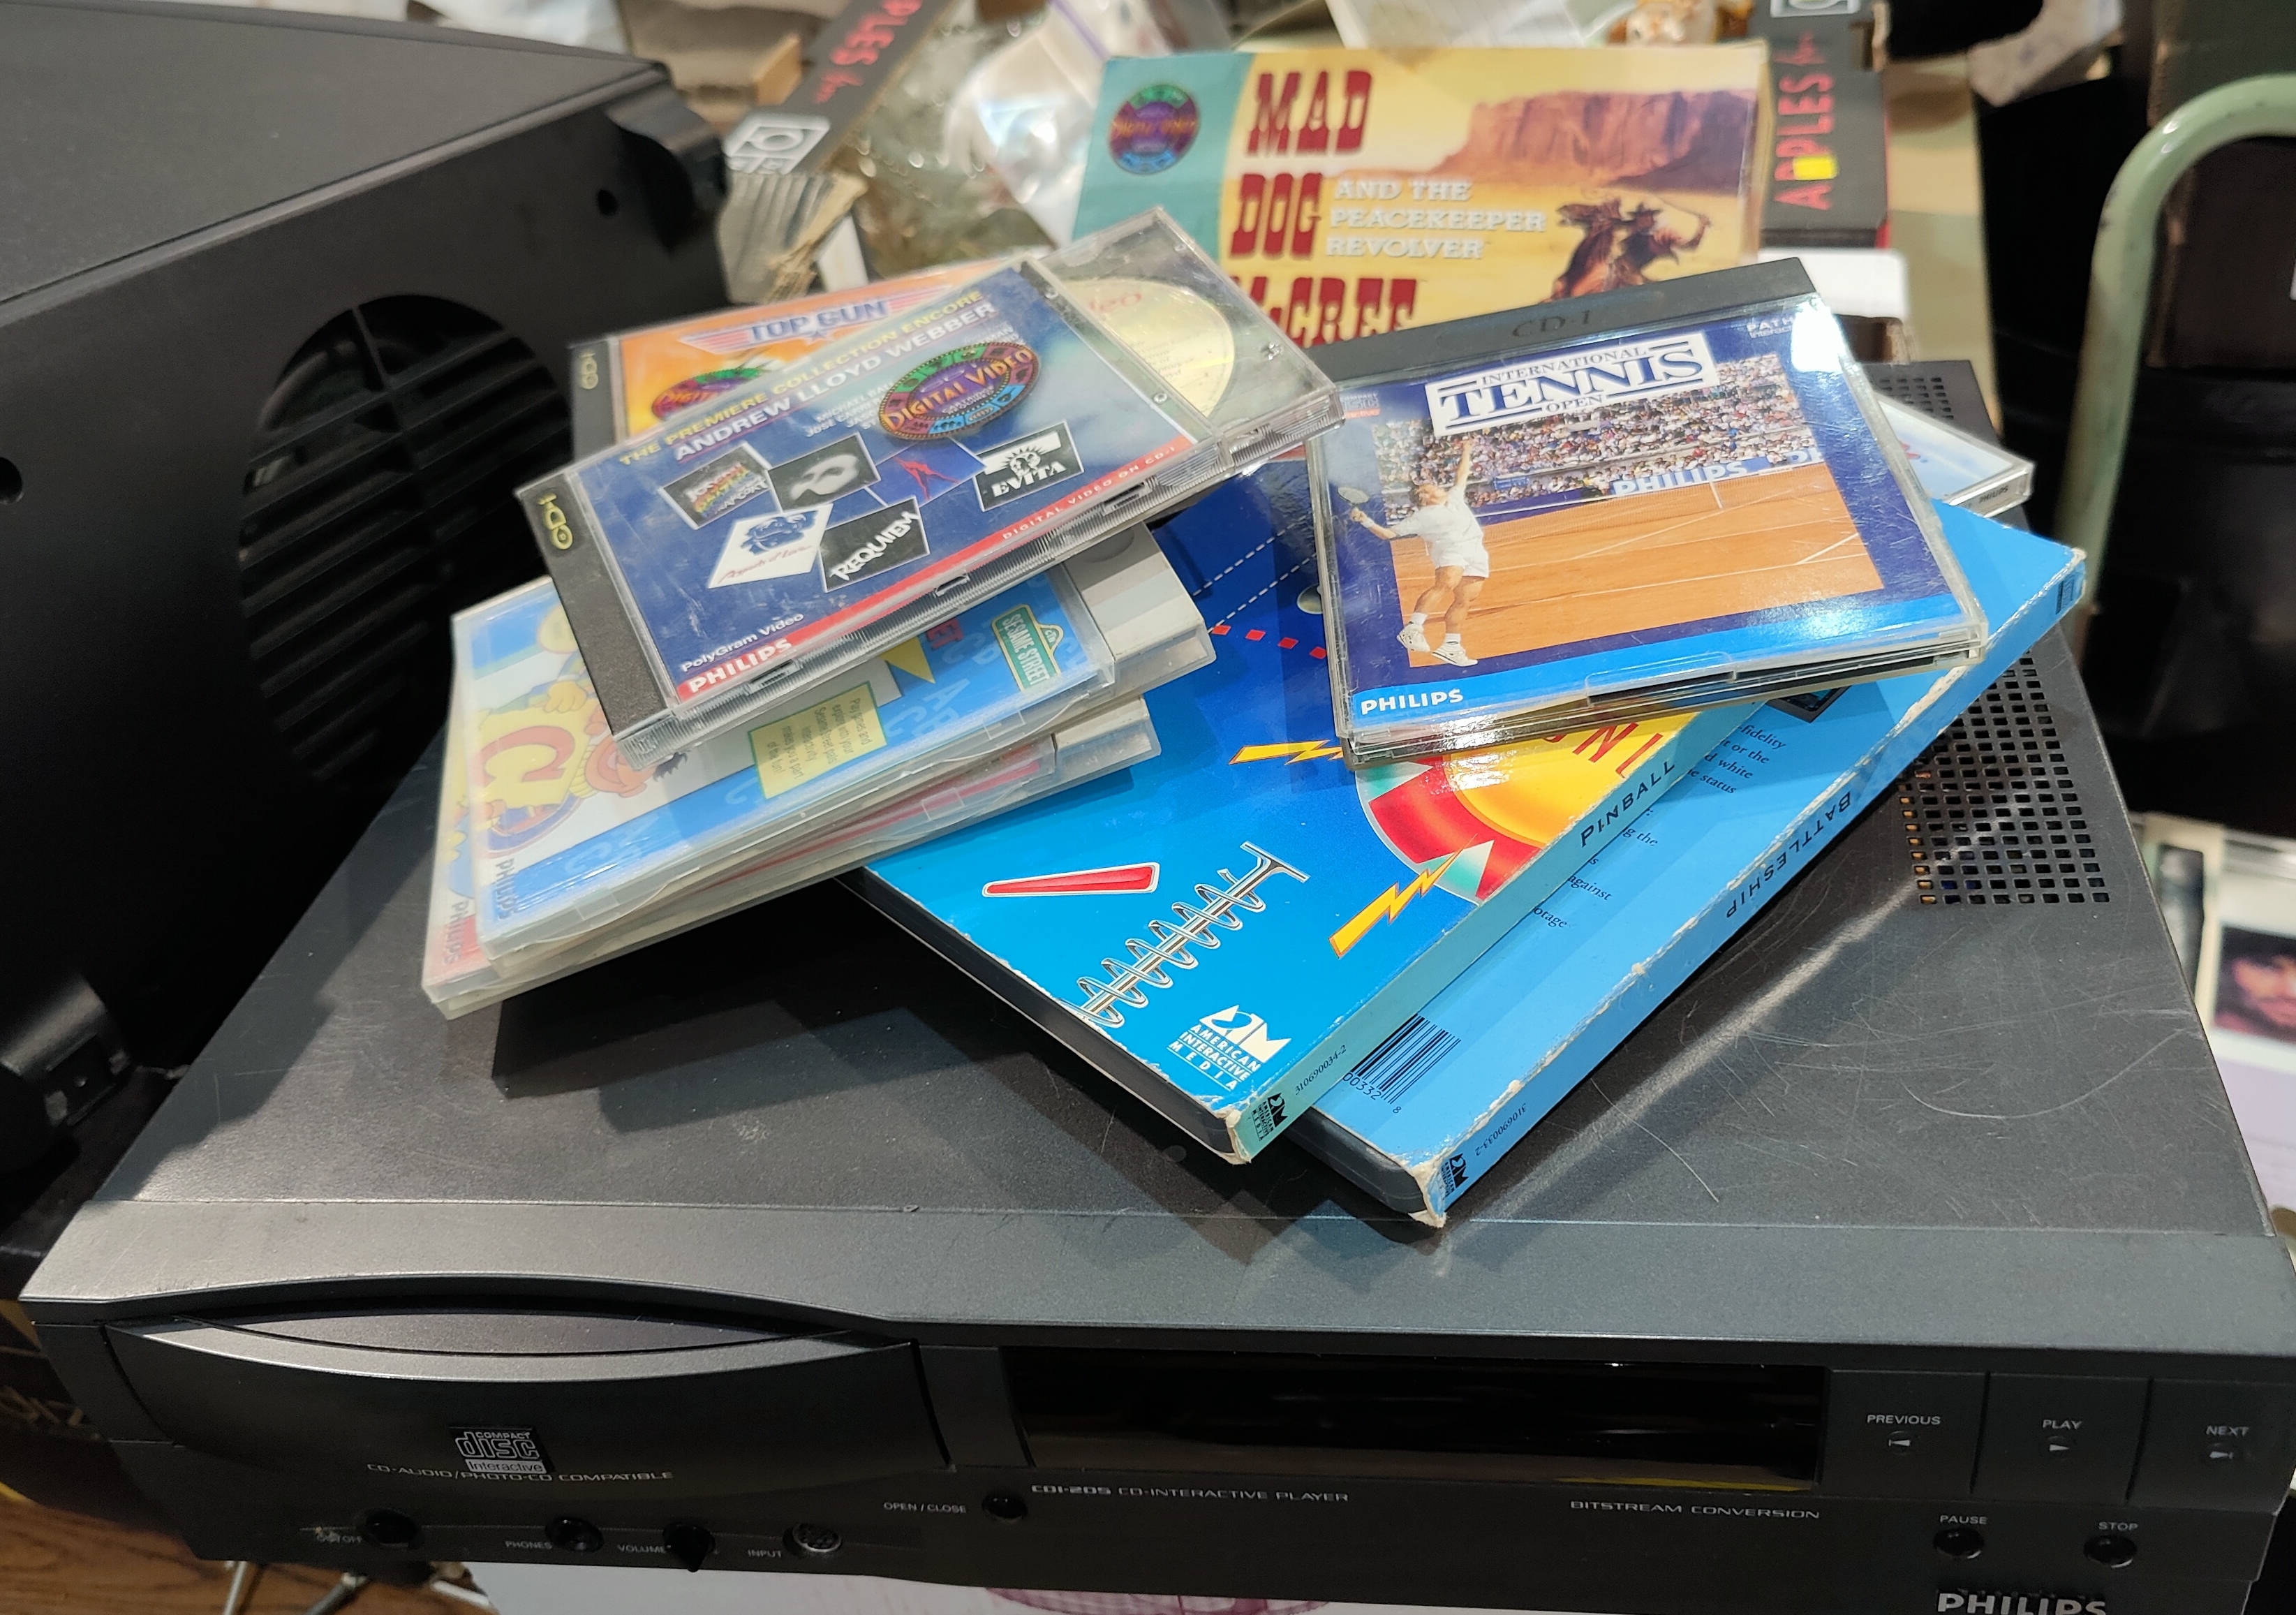 A vintage CD-1 games machine and games.